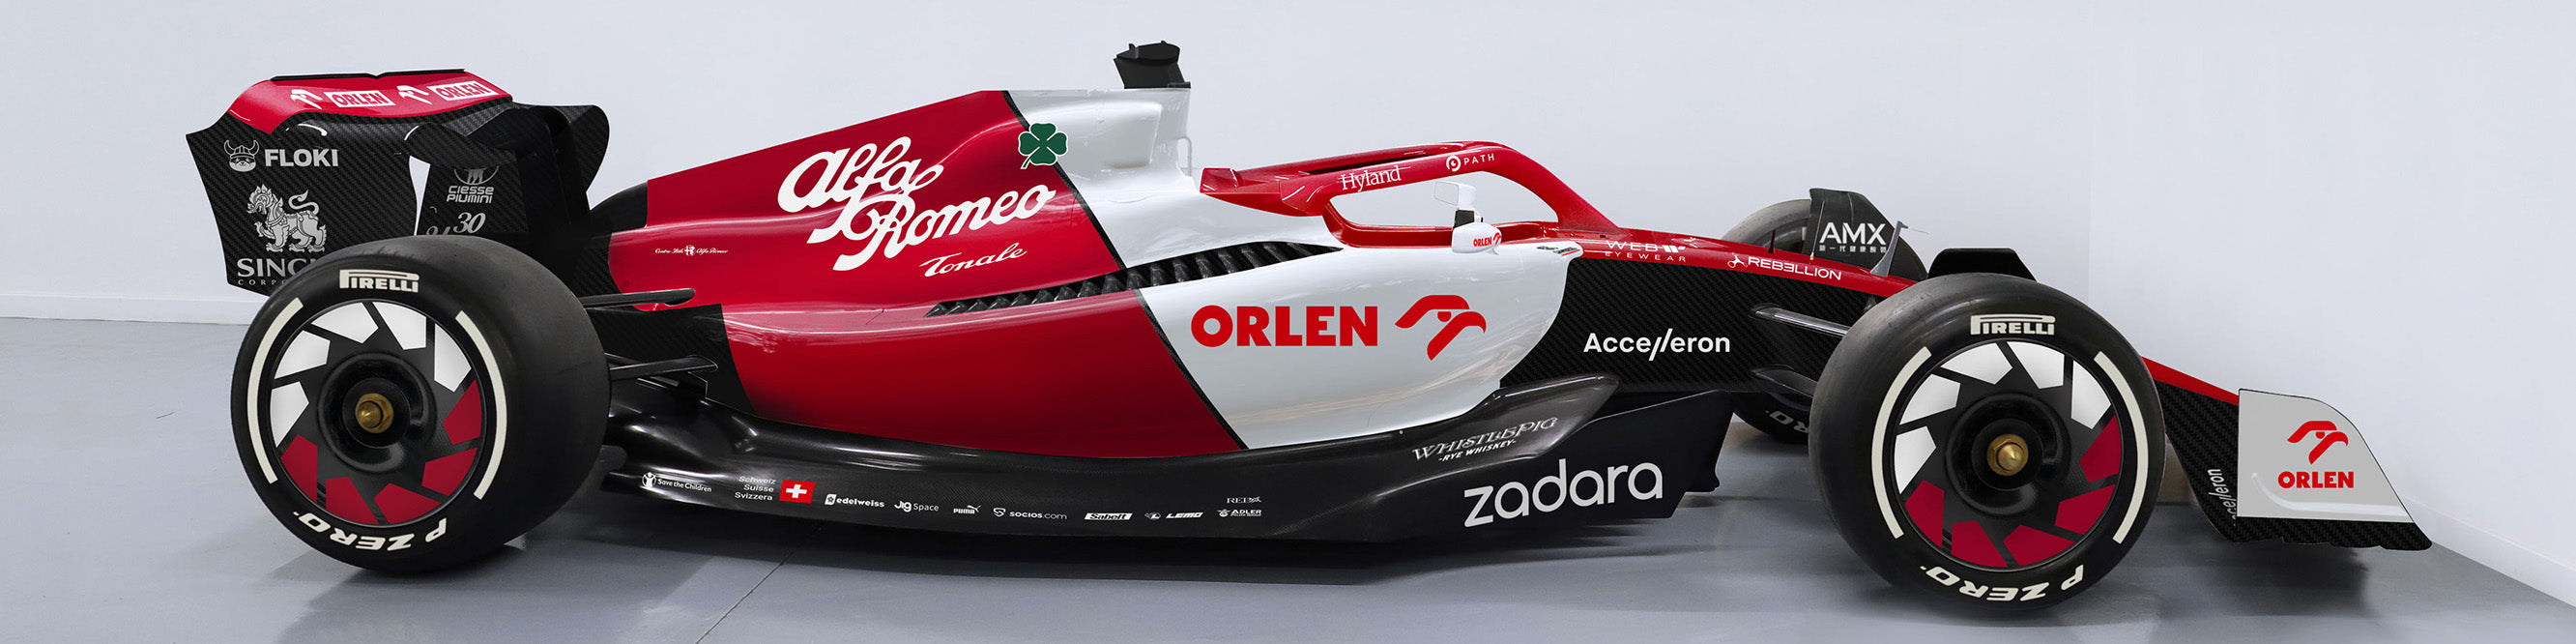 THE MEMENTO GROUP LAUNCHES FIRST 2022 F1® SHOW CAR IN PARTNERSHIP WITH ALFA ROMEO F1 TEAM ORLEN